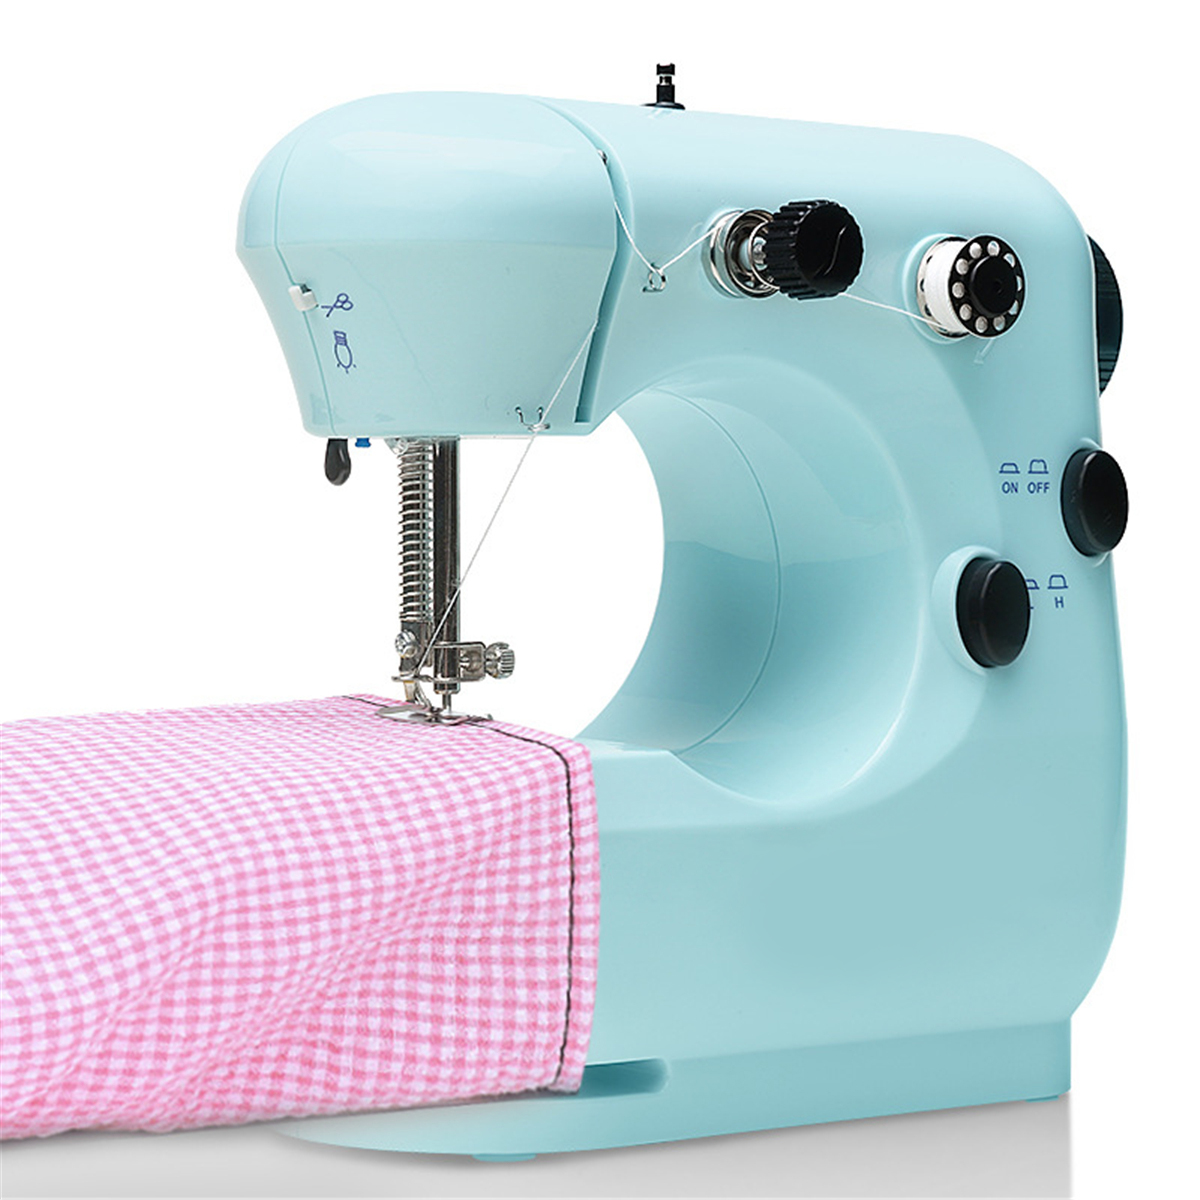 Mini-Portable-Electric-Desktop-Sewing-Machine-2-Speeds-For-DIY-Stitch-Clothes-Fabric-1690684-8